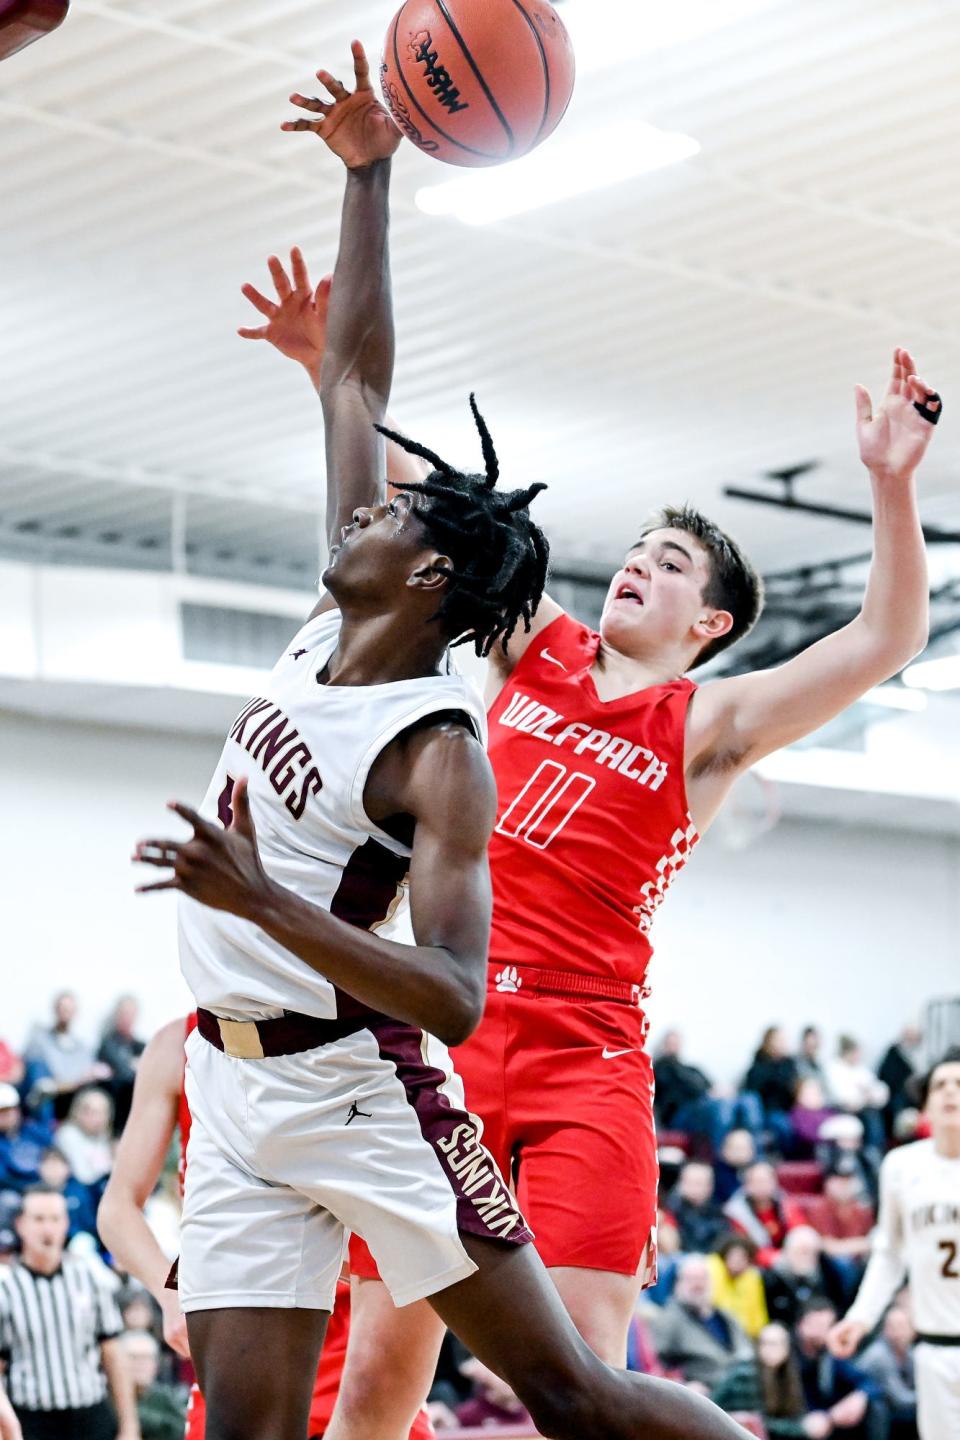 Laingsburg's Jackson Audretsch, right, and Potterville's Da'Marion Hicks go for a rebound during the third quarter on Friday, Jan. 20, 2023, at Potterville High School.